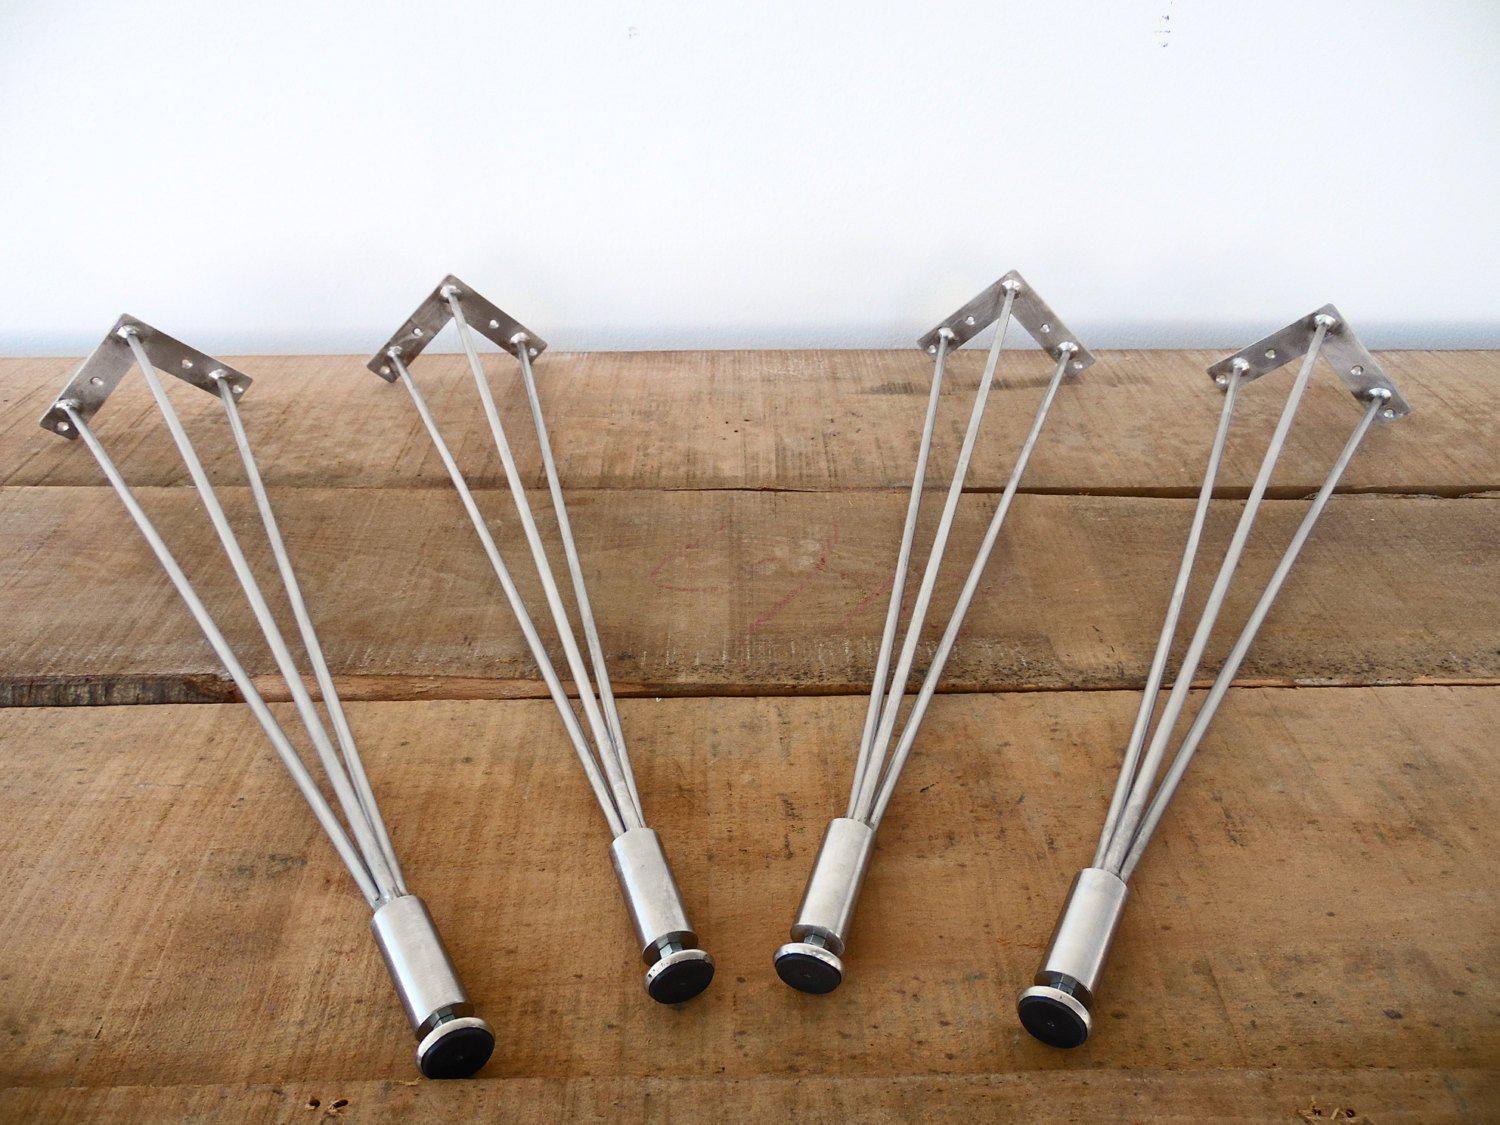 40"  3-pins-s Table Legs, Height 33" To 40" Set(4)